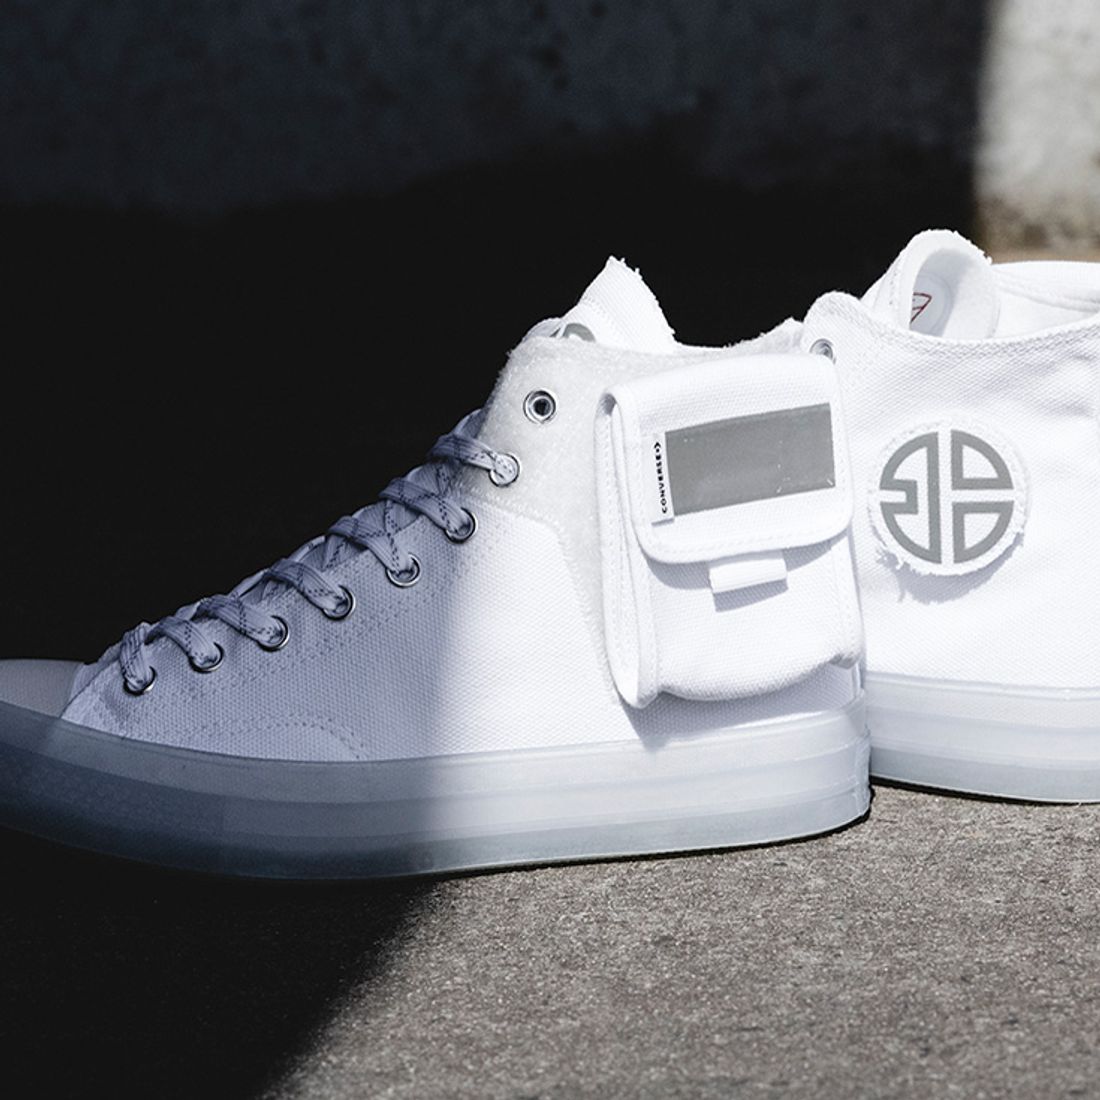 The Zhang Converse Chunk Collaboration the Glow - Sneaker Freaker